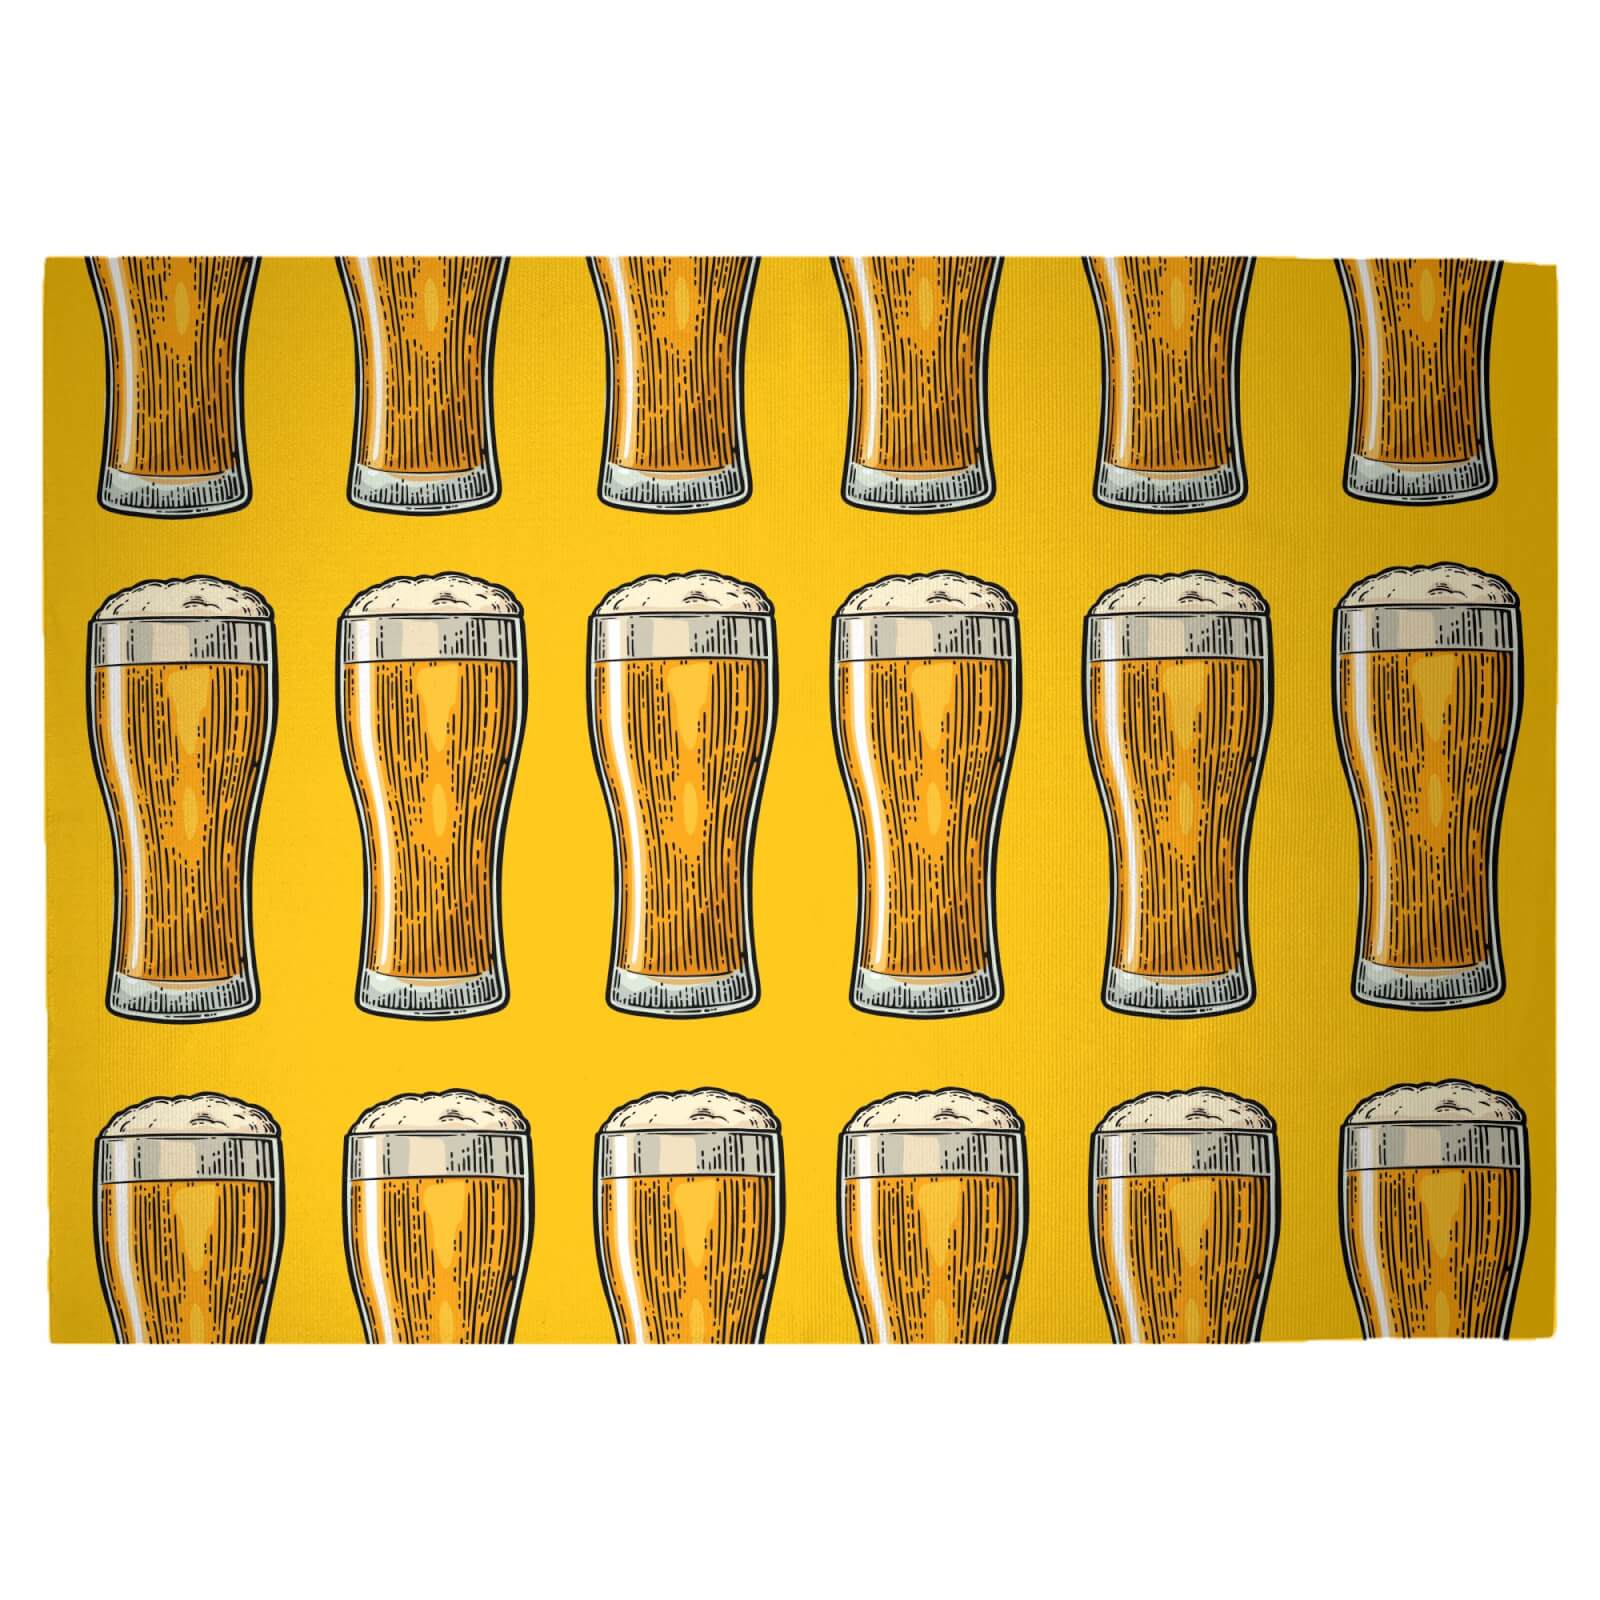 Beers Woven Rug - Large